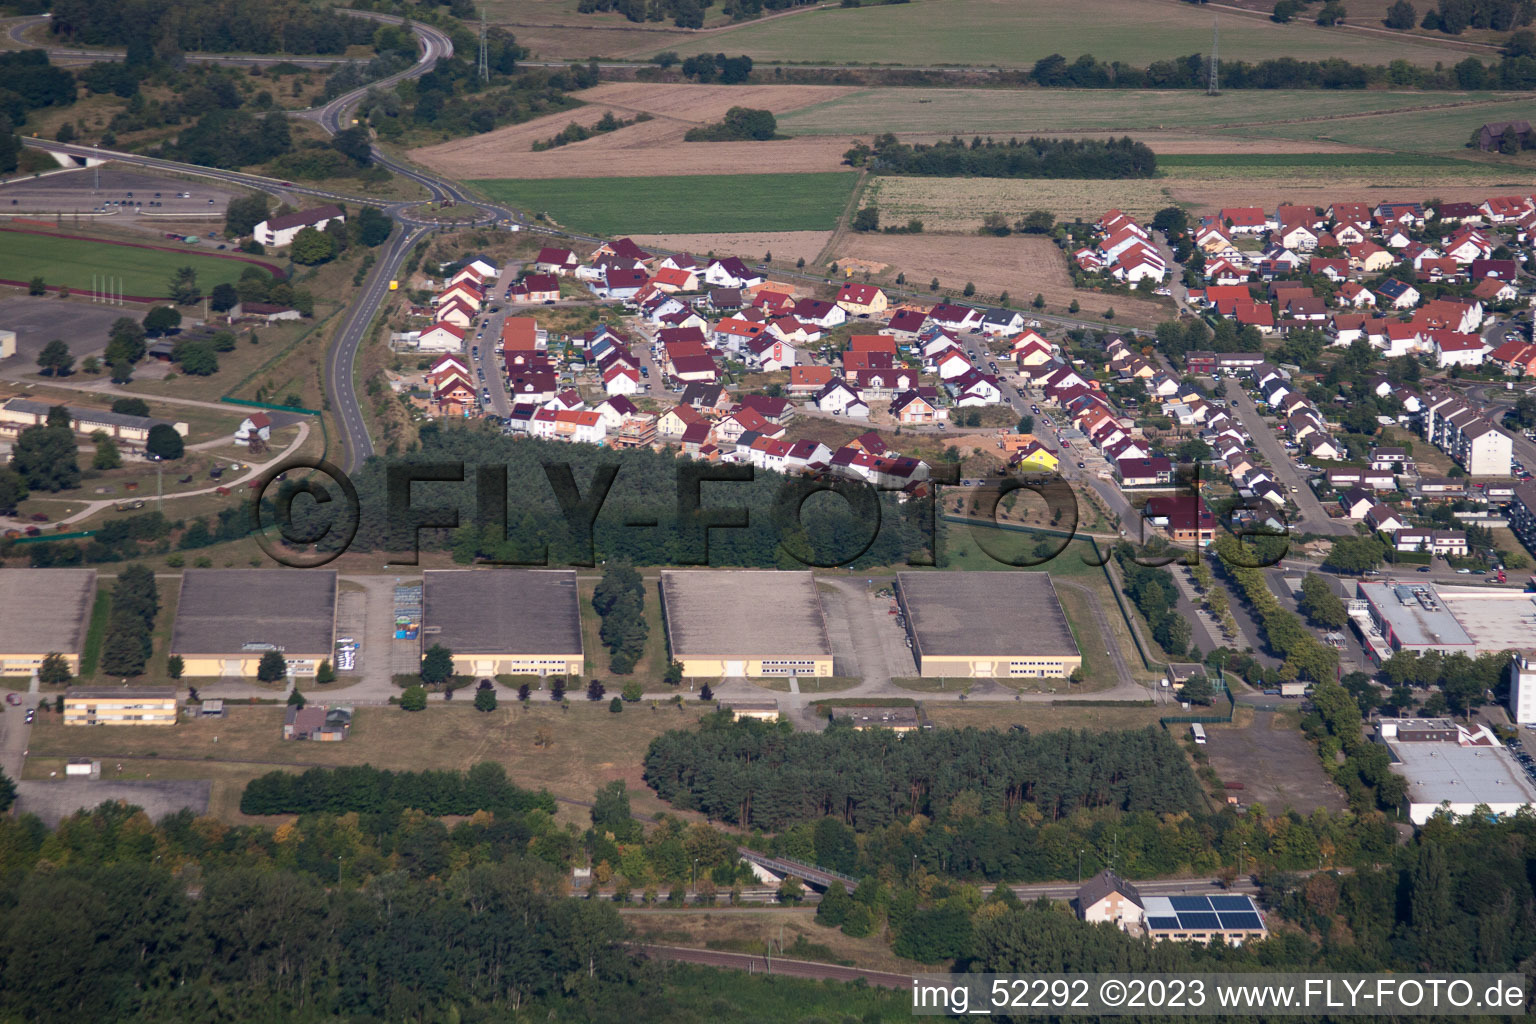 District Sondernheim in Germersheim in the state Rhineland-Palatinate, Germany viewn from the air